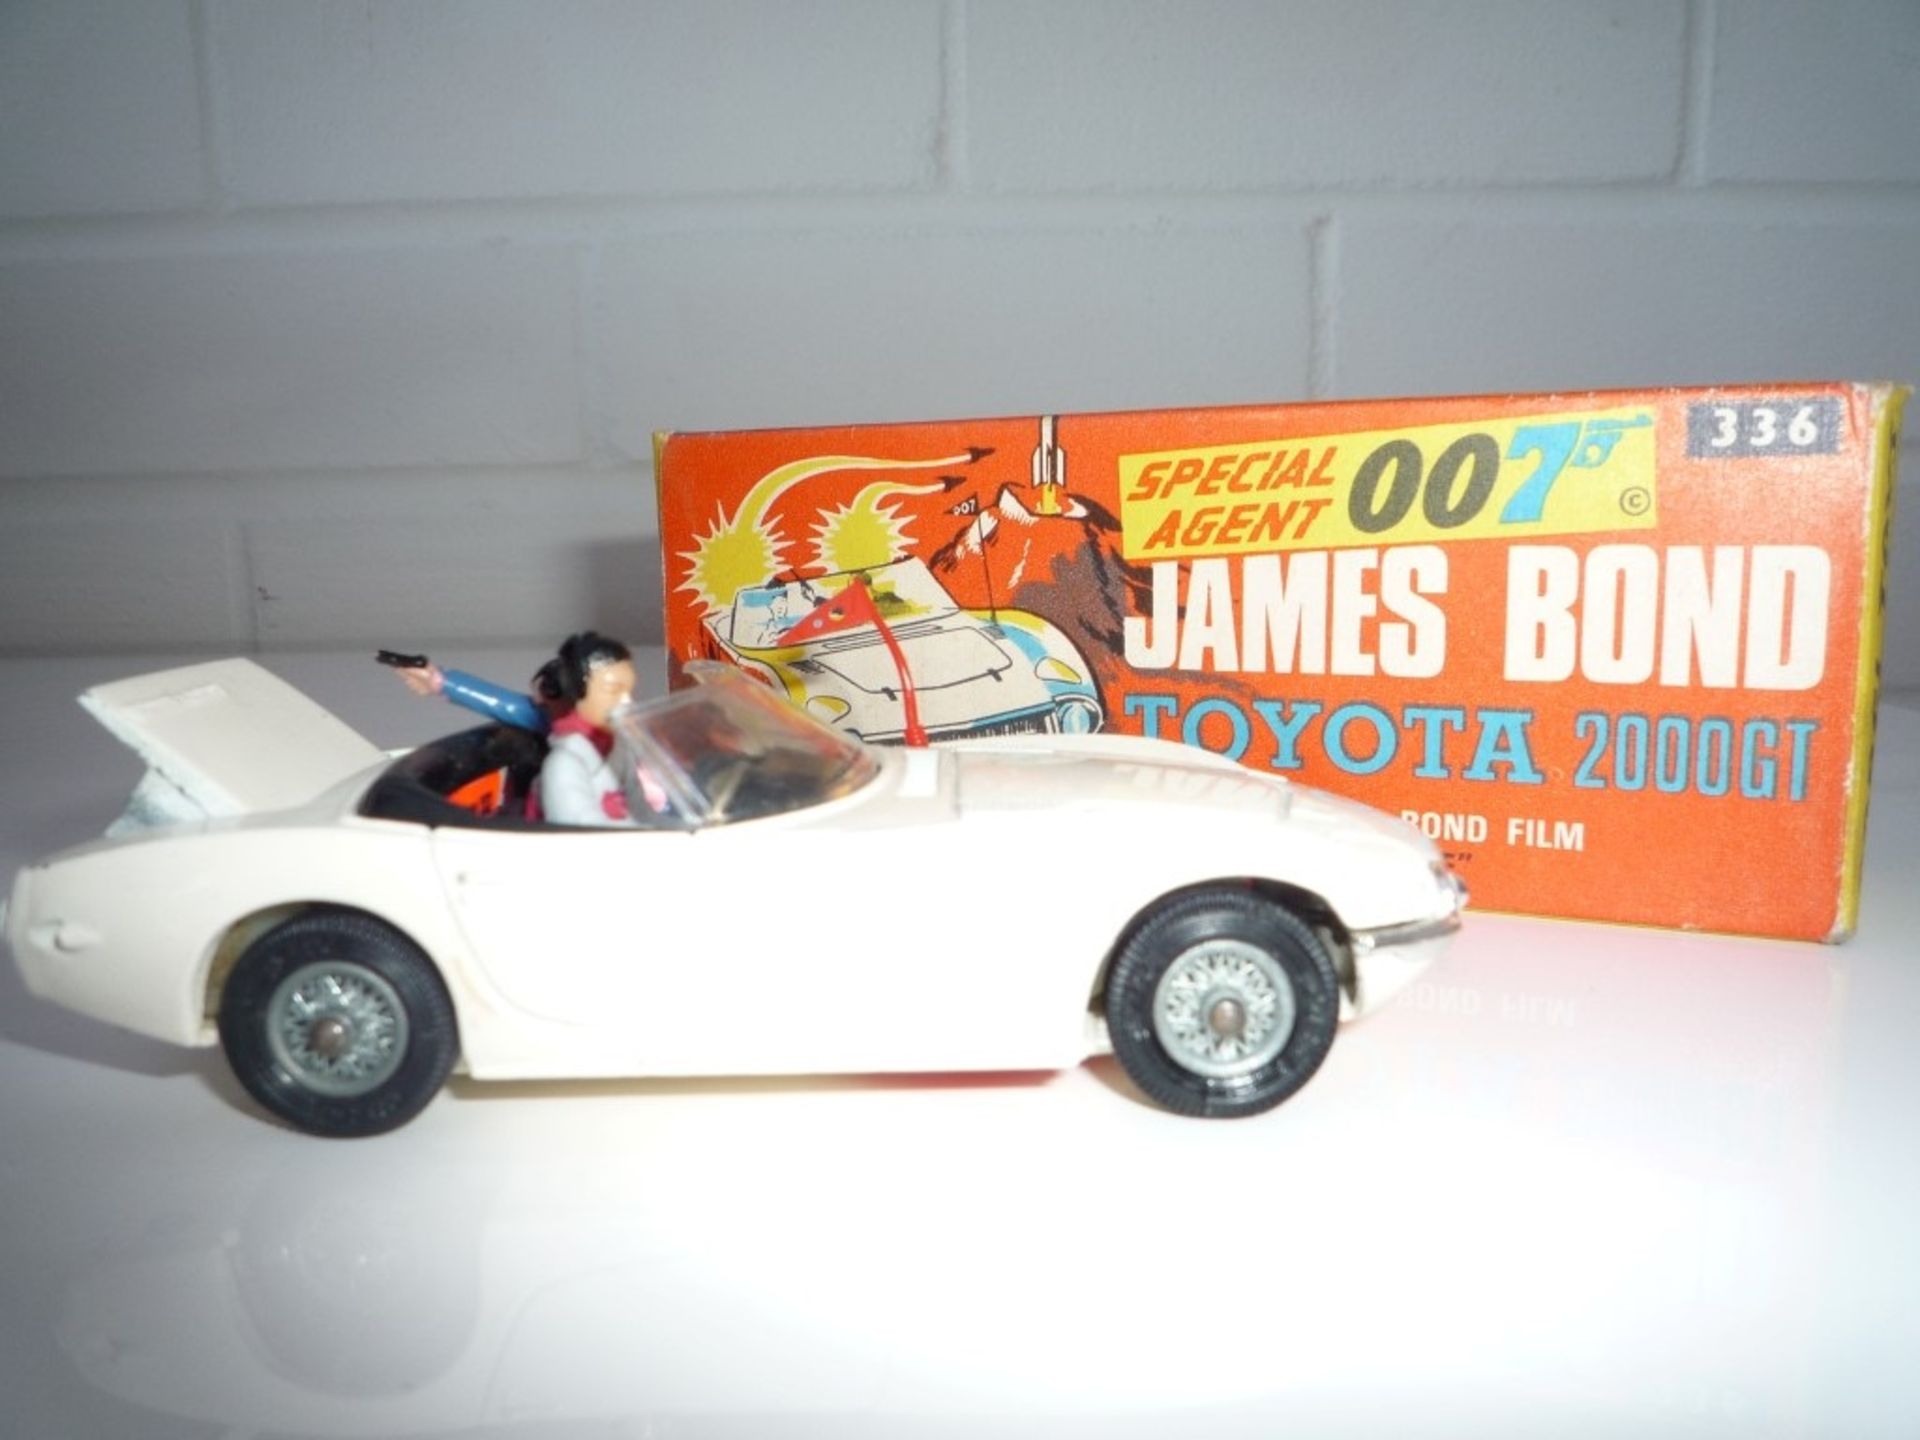 James Bond You Only Live Twice Toyota 2000GT model - Image 2 of 2